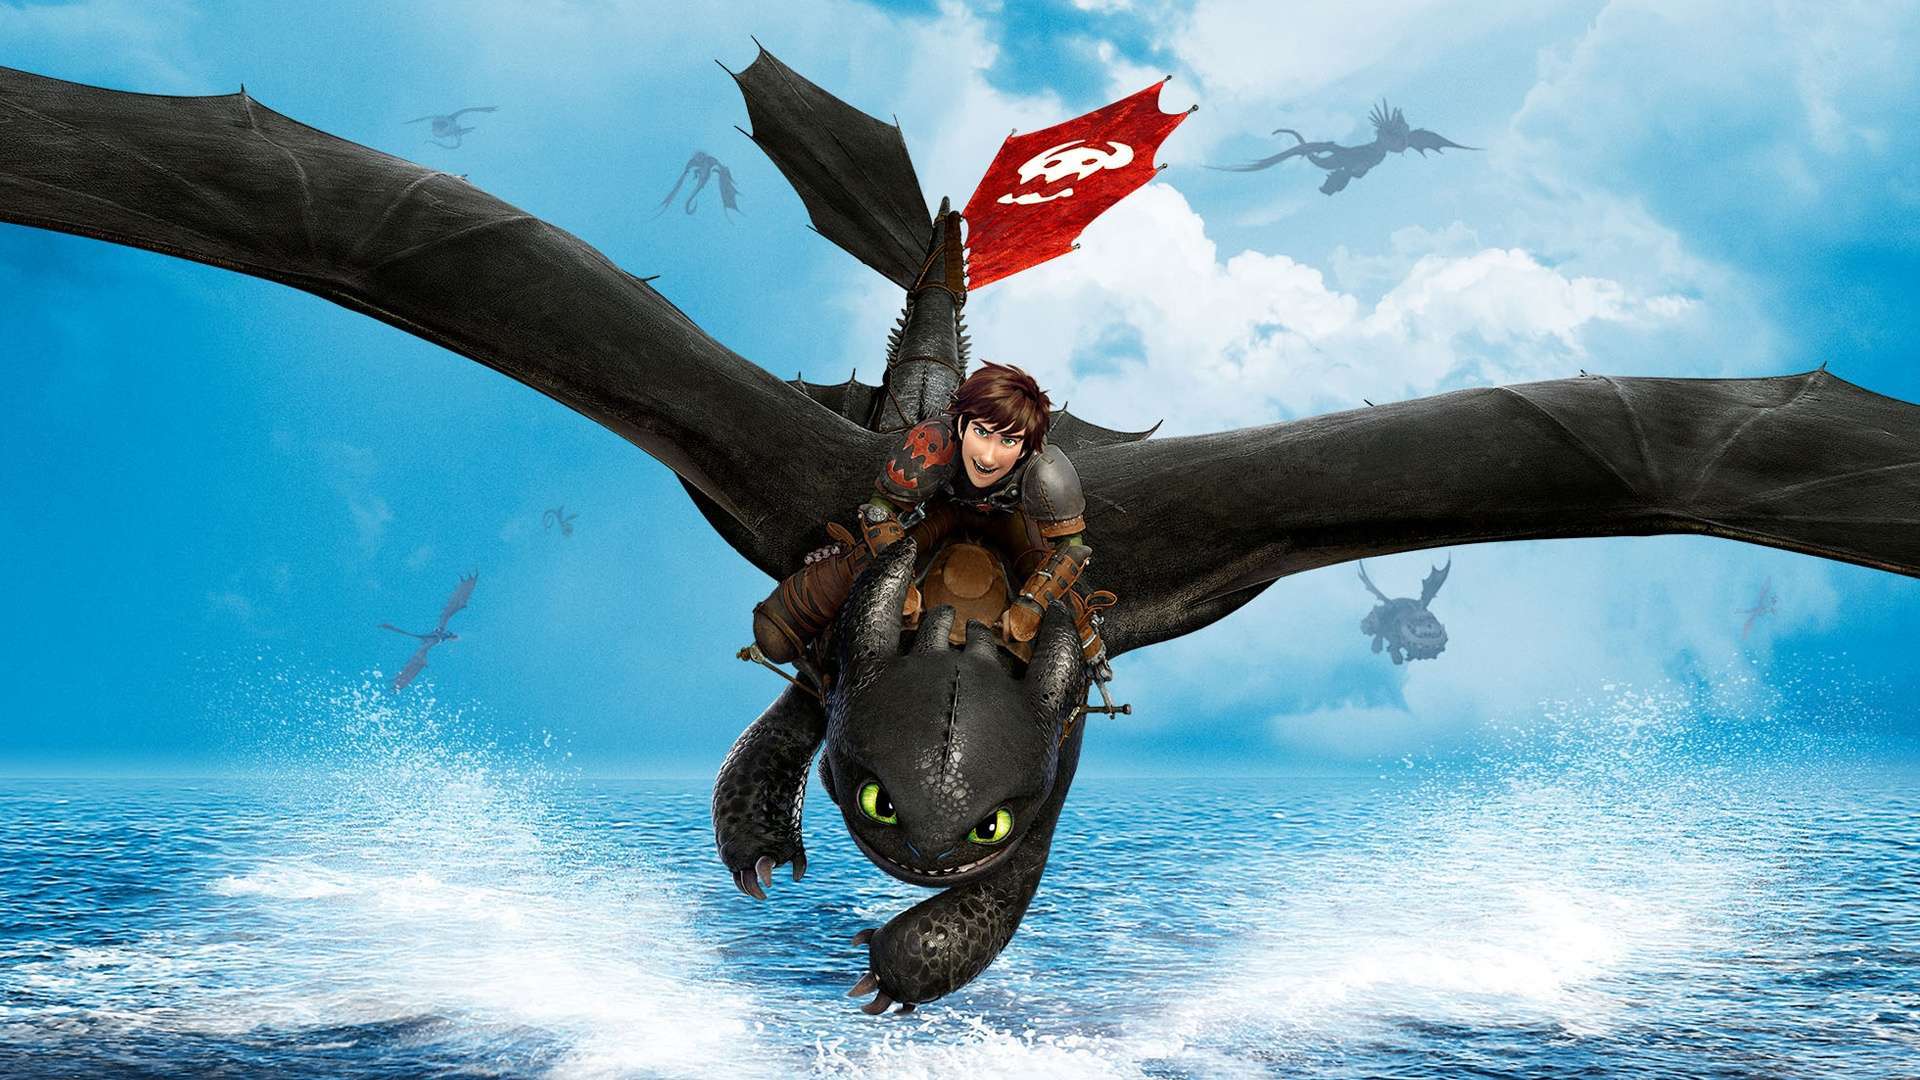 Wallpaper HD How To Train Your Dragon 1080p Upload